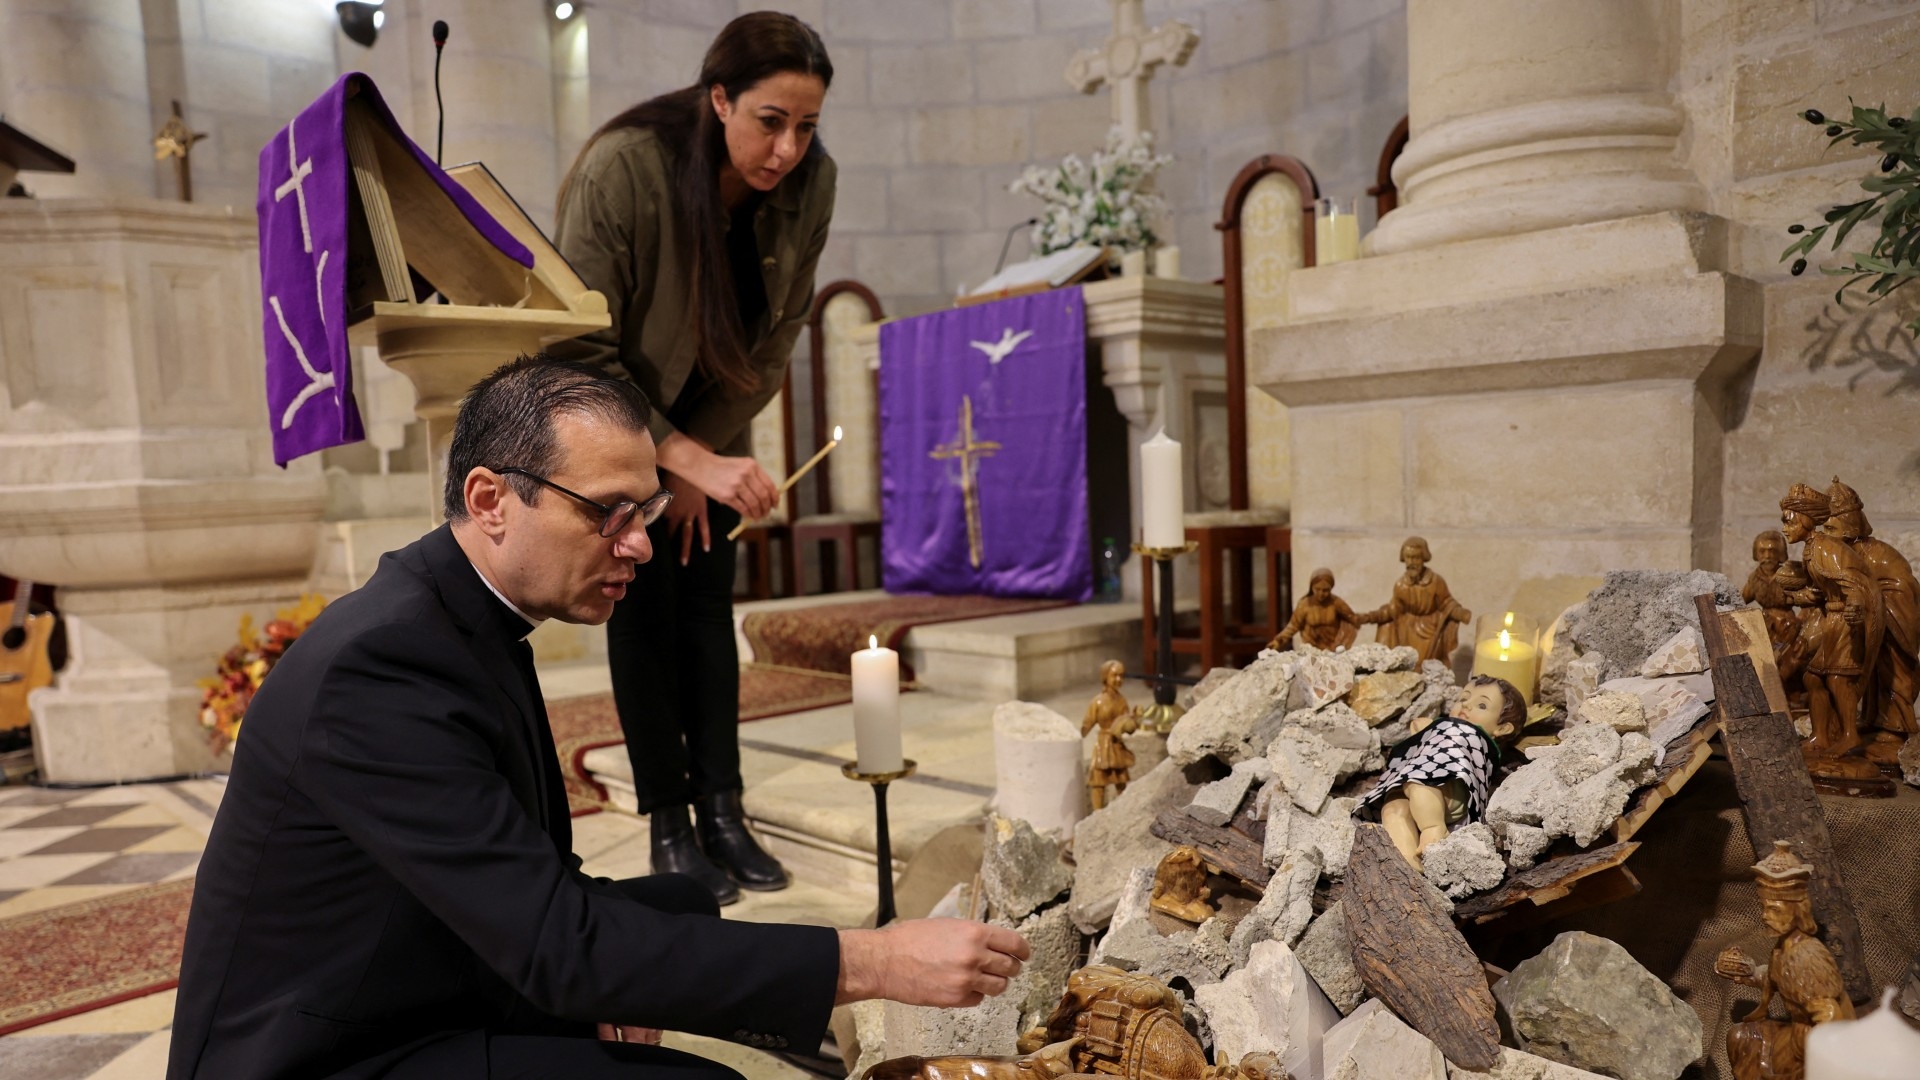 Pastor Munther Isaac adds dirt to an installation that shows a figure symbolizing baby Jesus lying amidst the rubble in a grotto ahead of Christmas at the Evangelical Lutheran Church (Reuters)